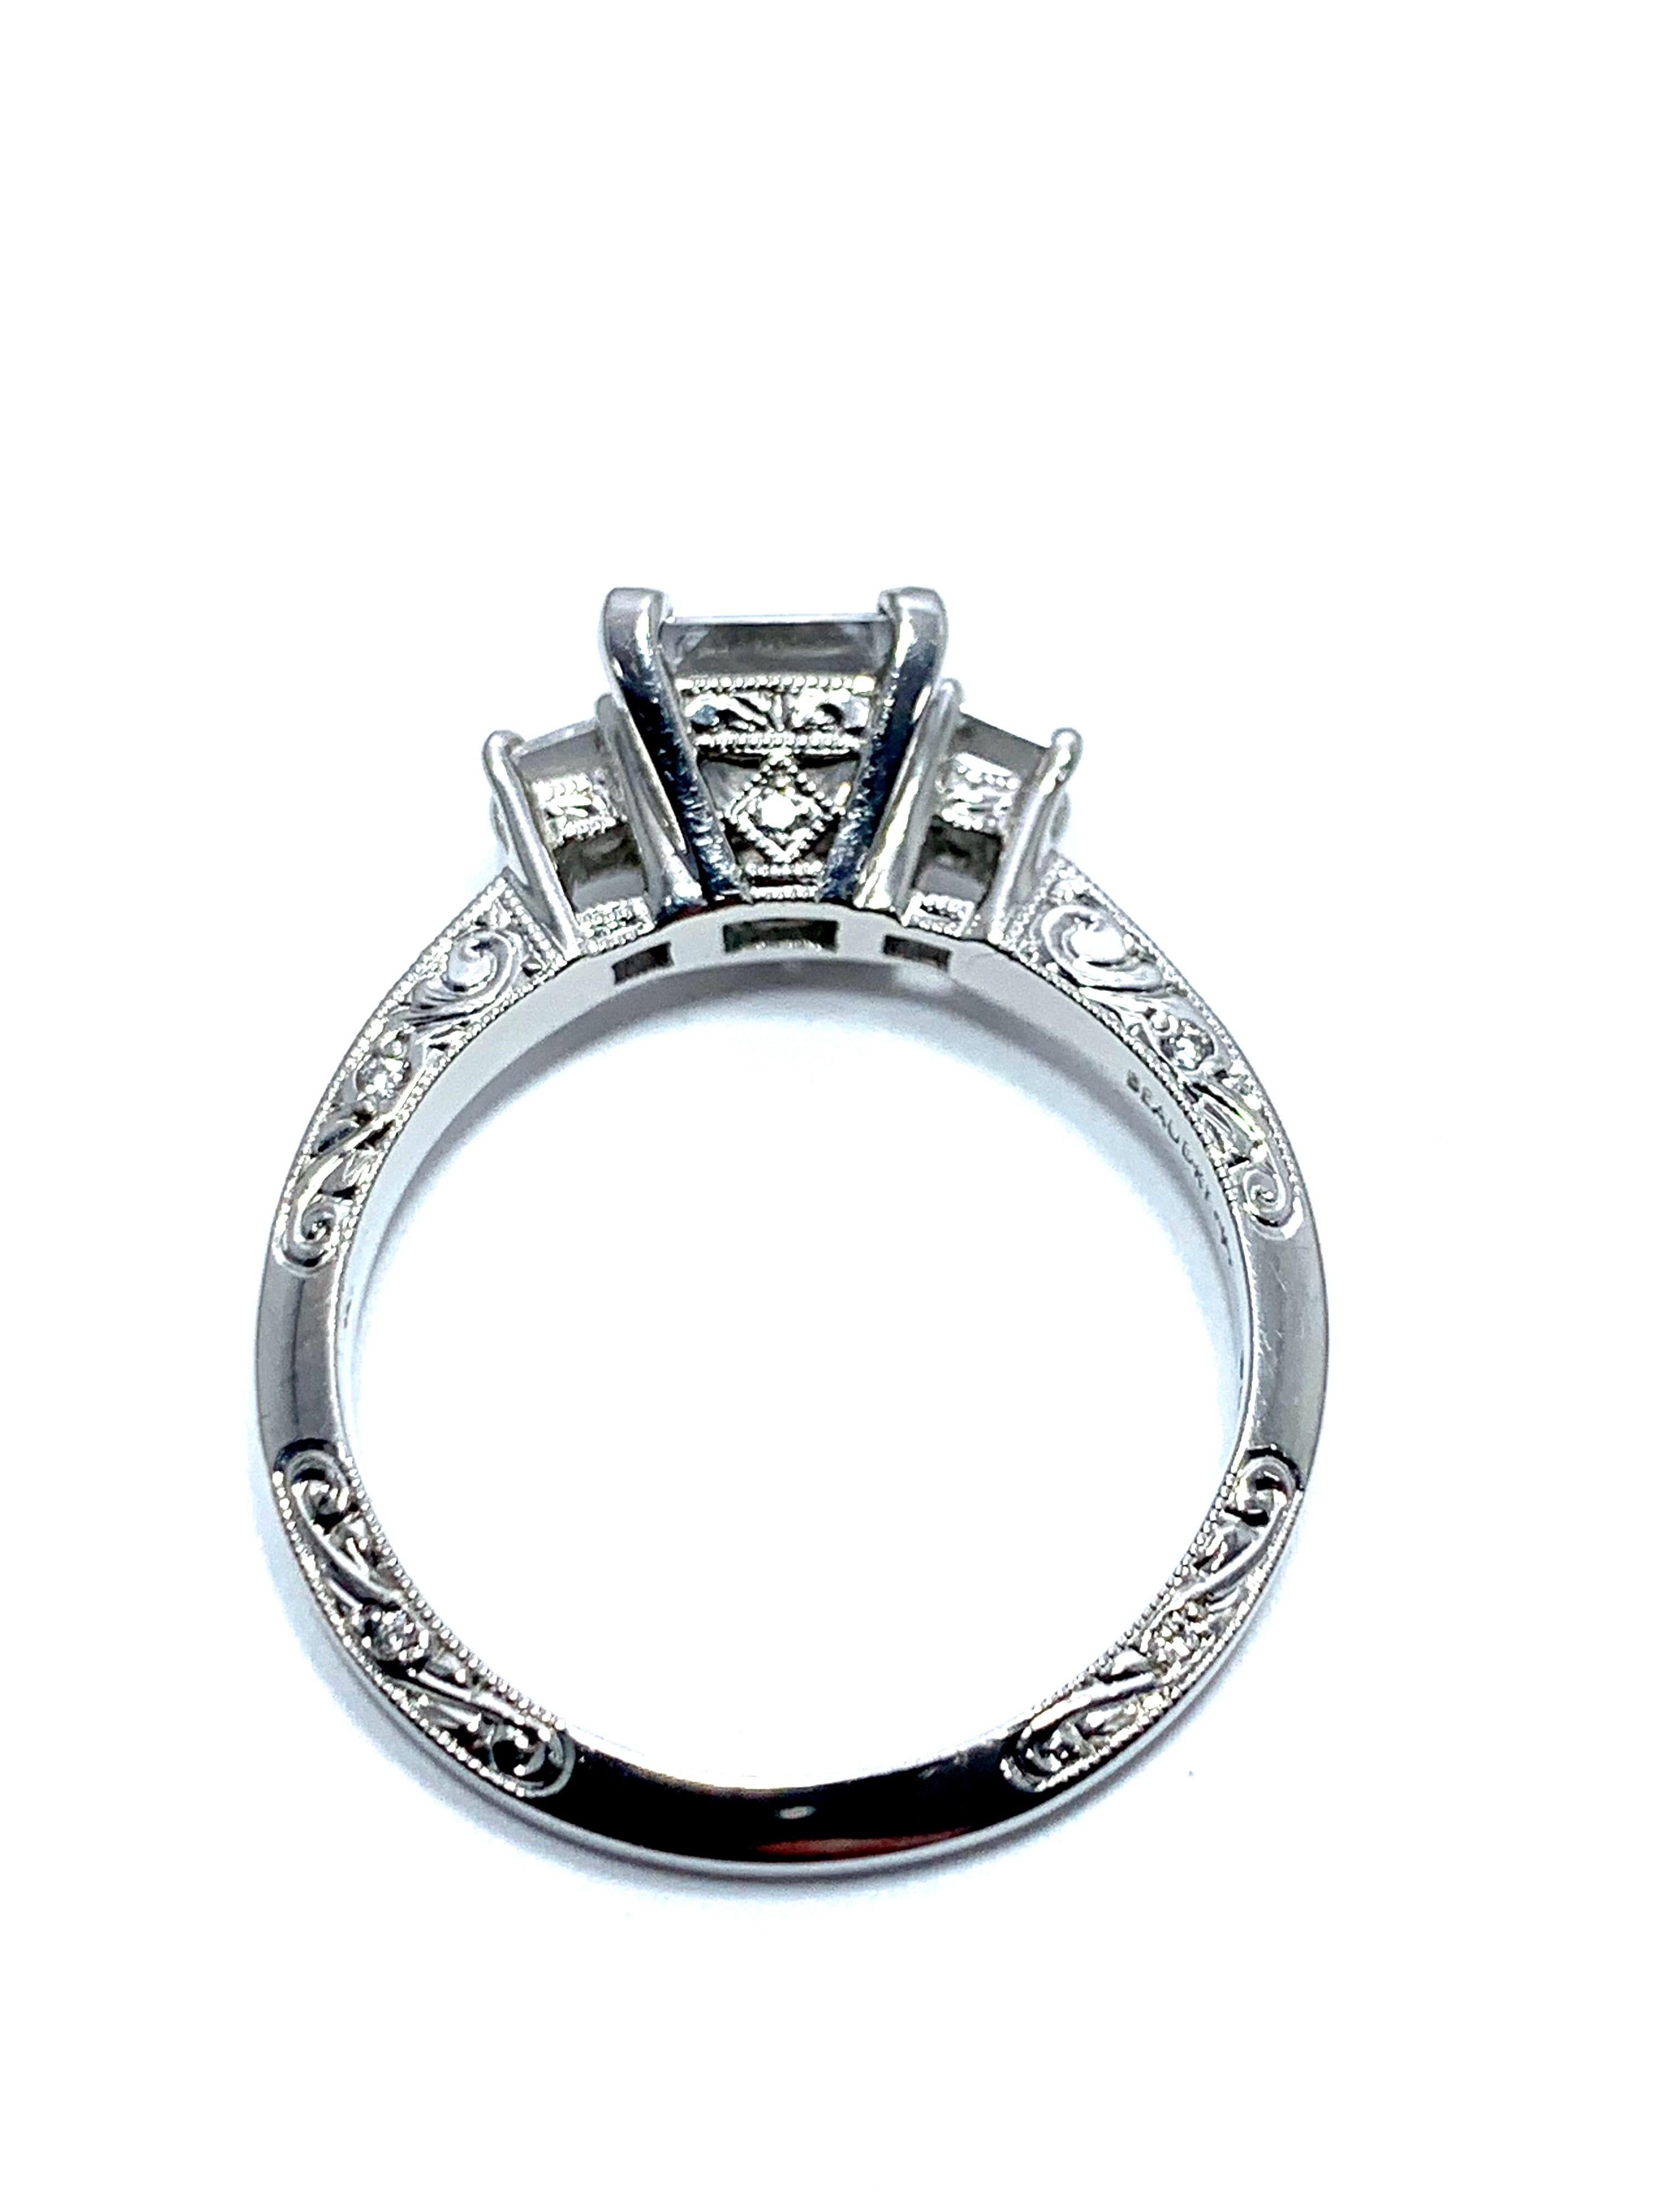 1.19 Carat Princess Cut Diamond and Handcrafted Platinum Engagement Ring In New Condition For Sale In Chevy Chase, MD